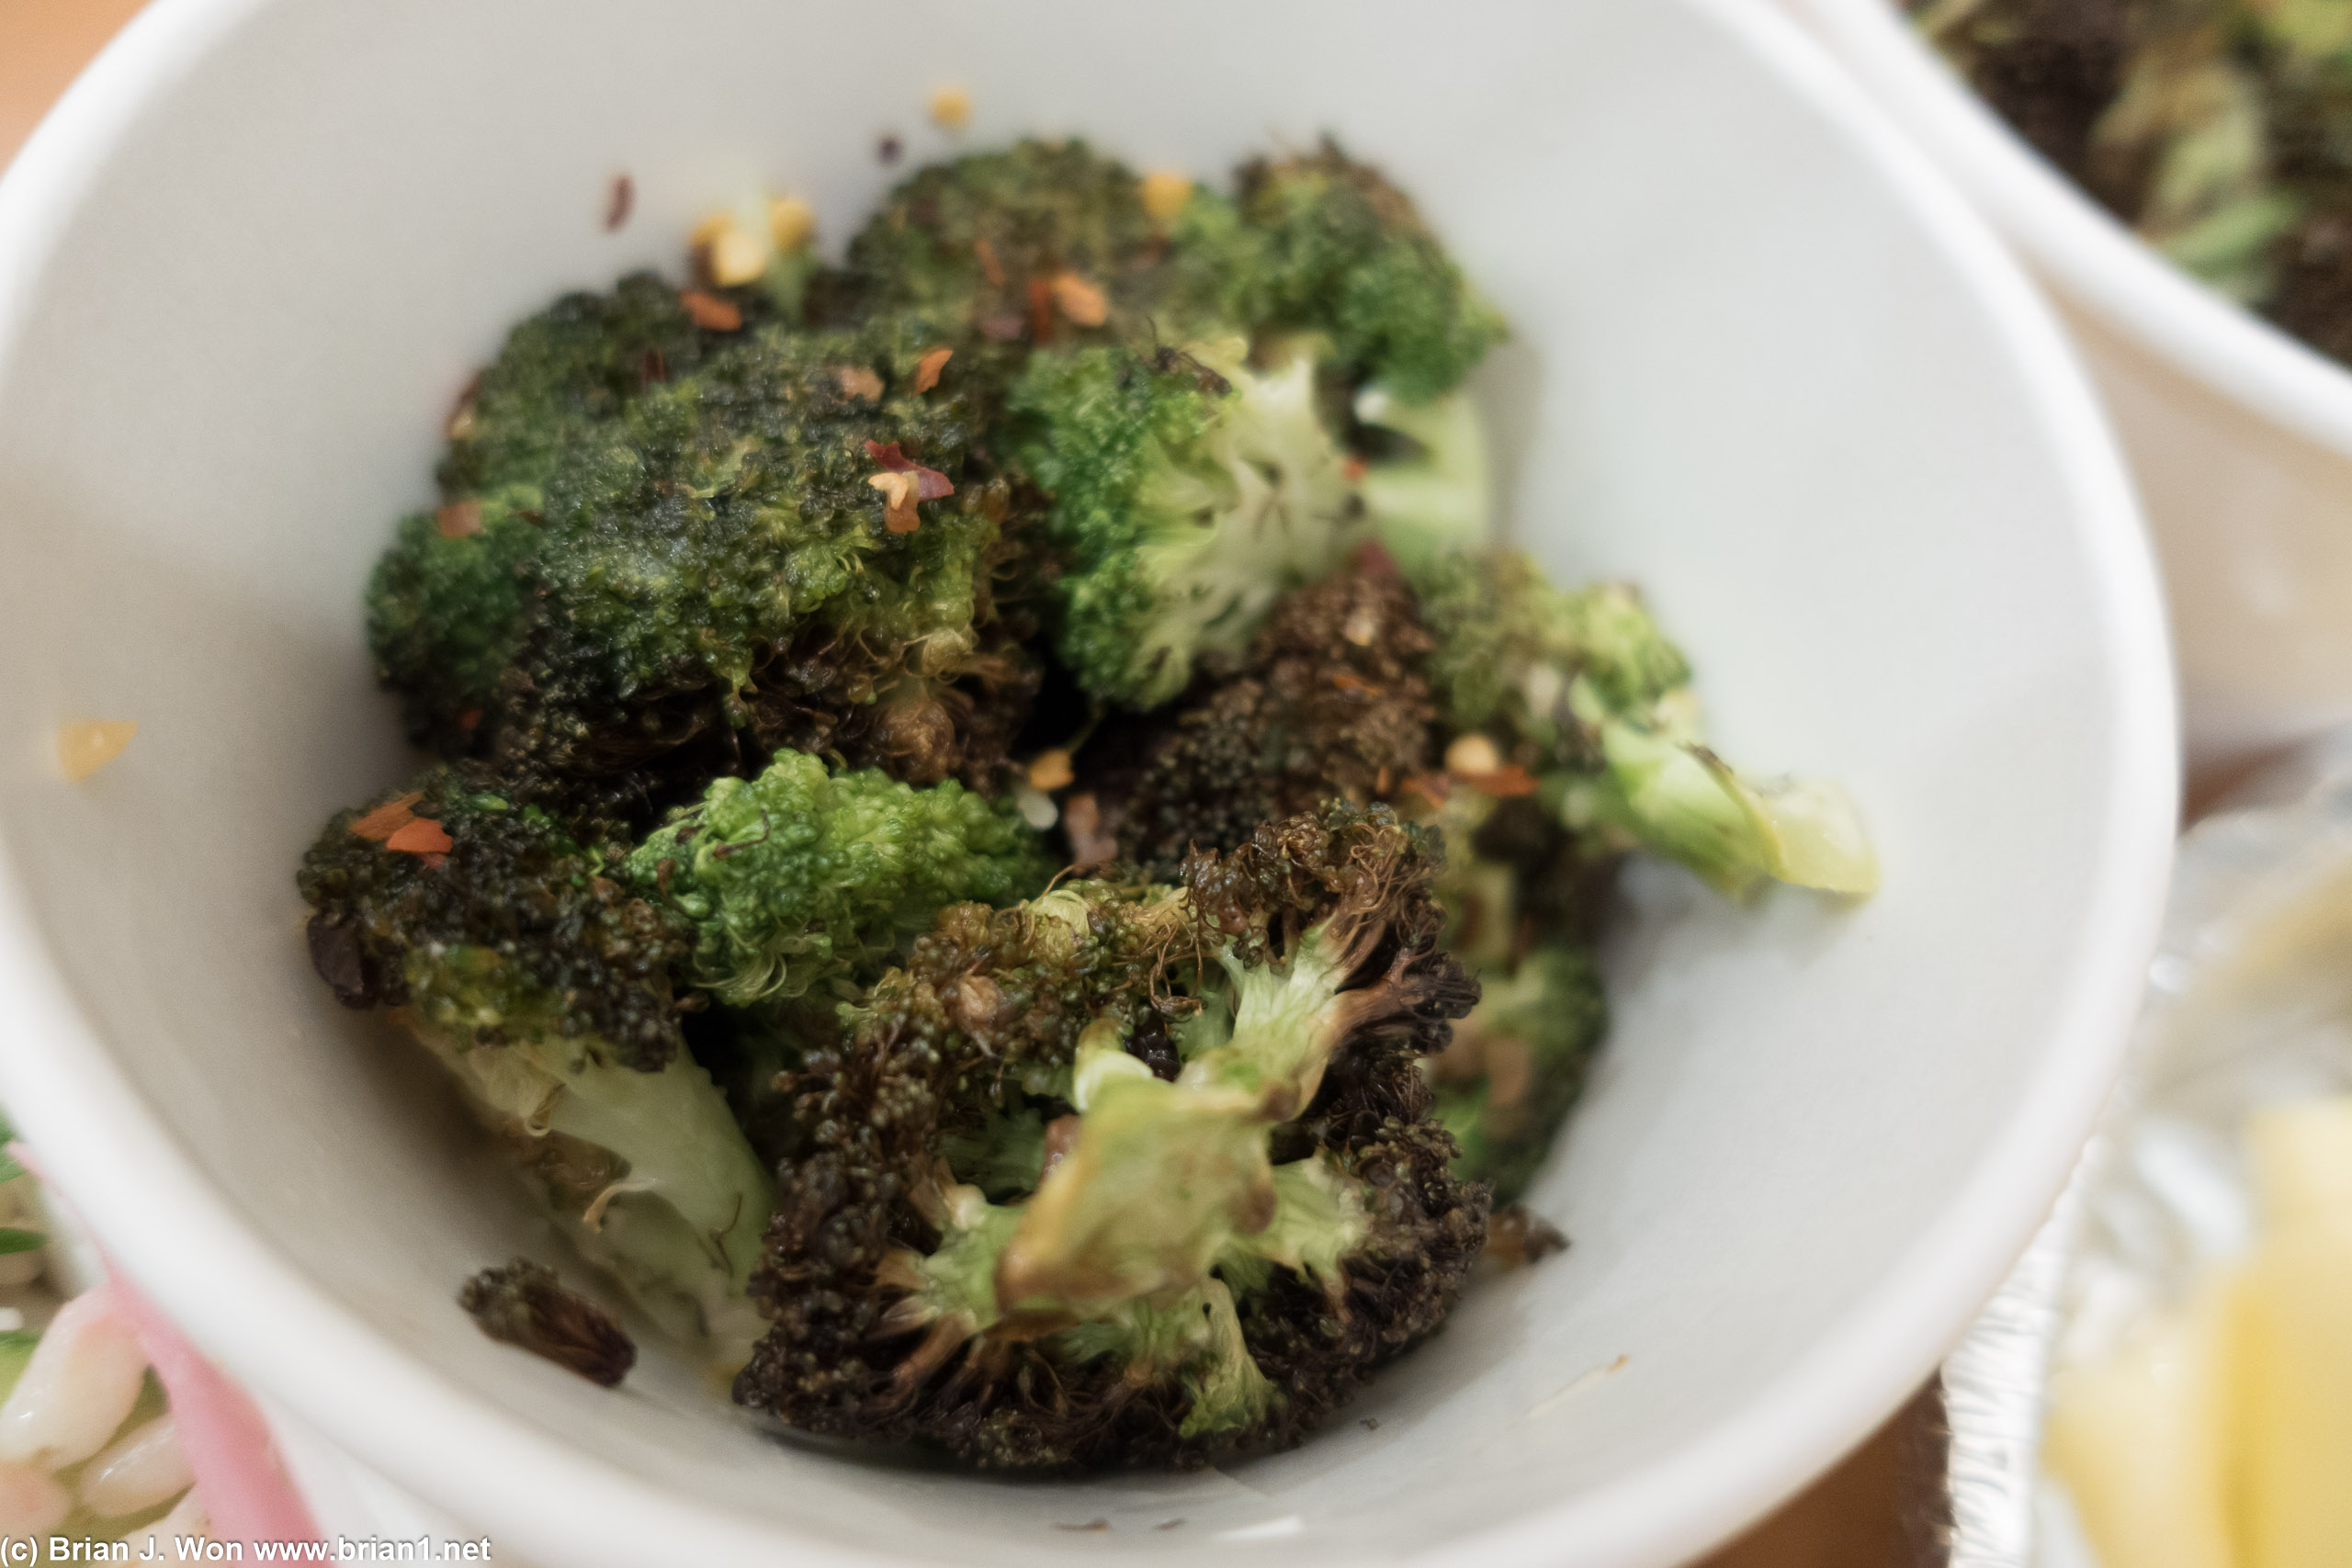 Broccoli was marveously seasoned and cooked.